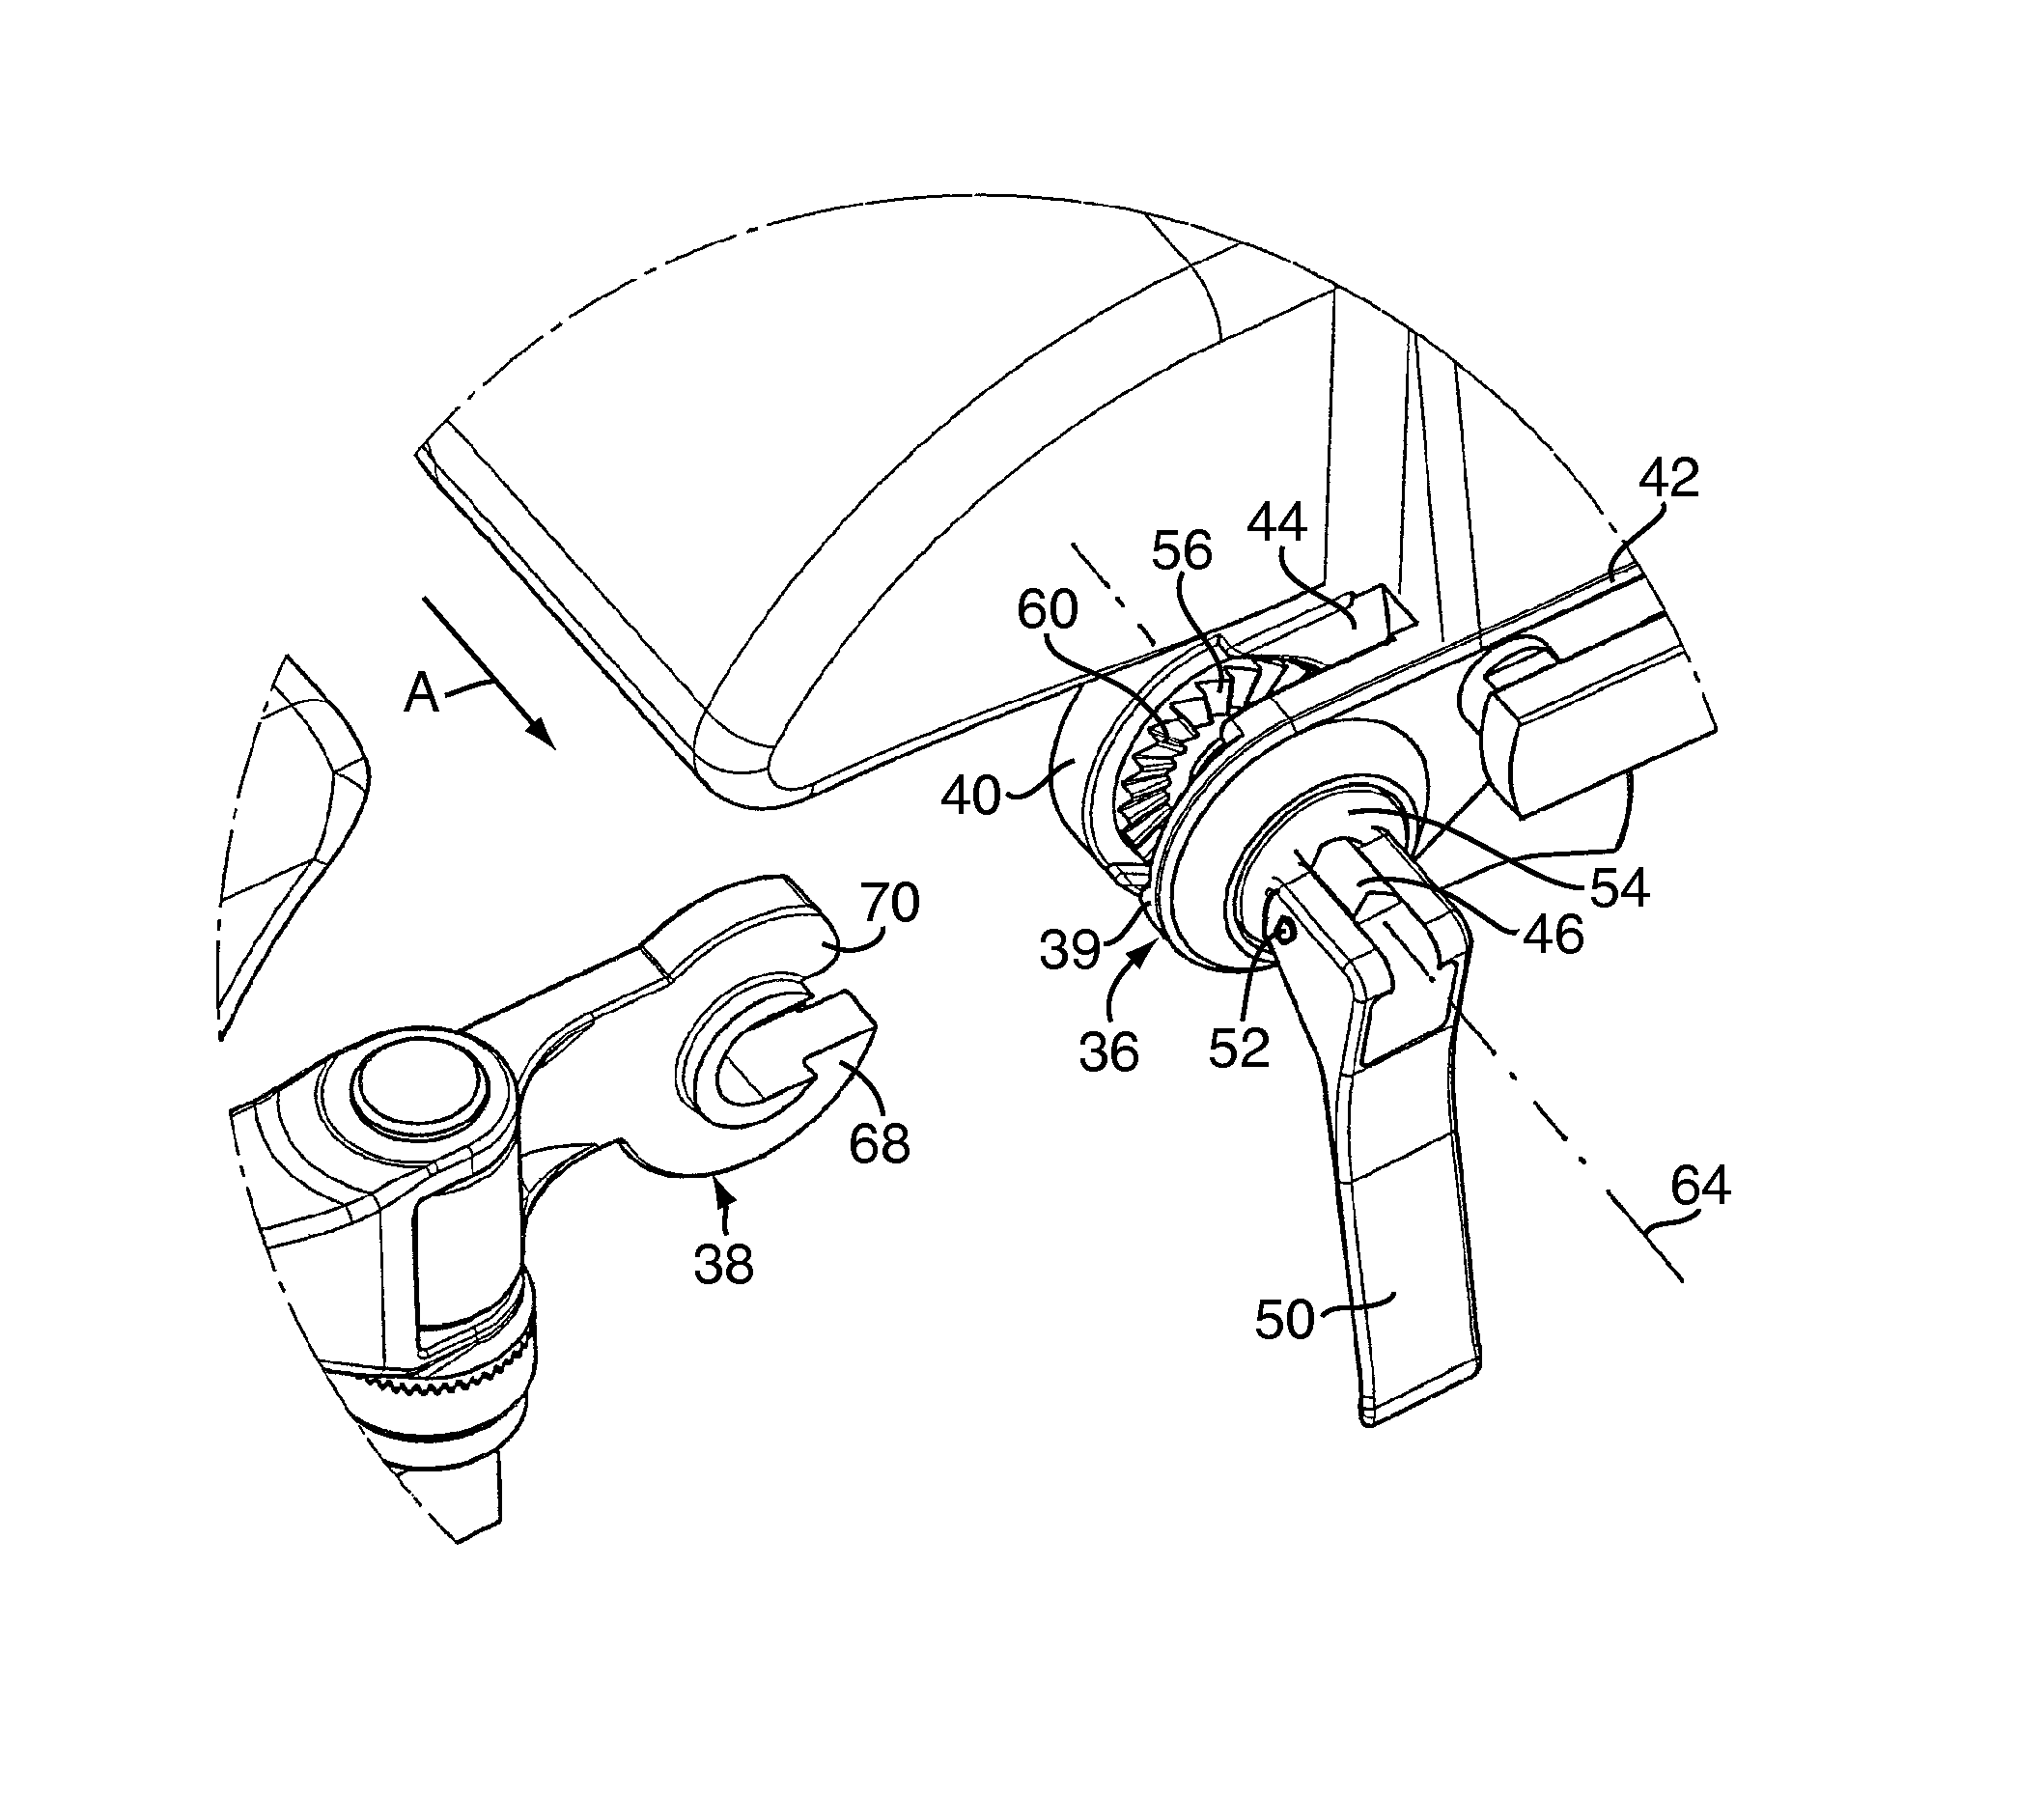 Joint arrangement for the connection of two segments of a patient bed